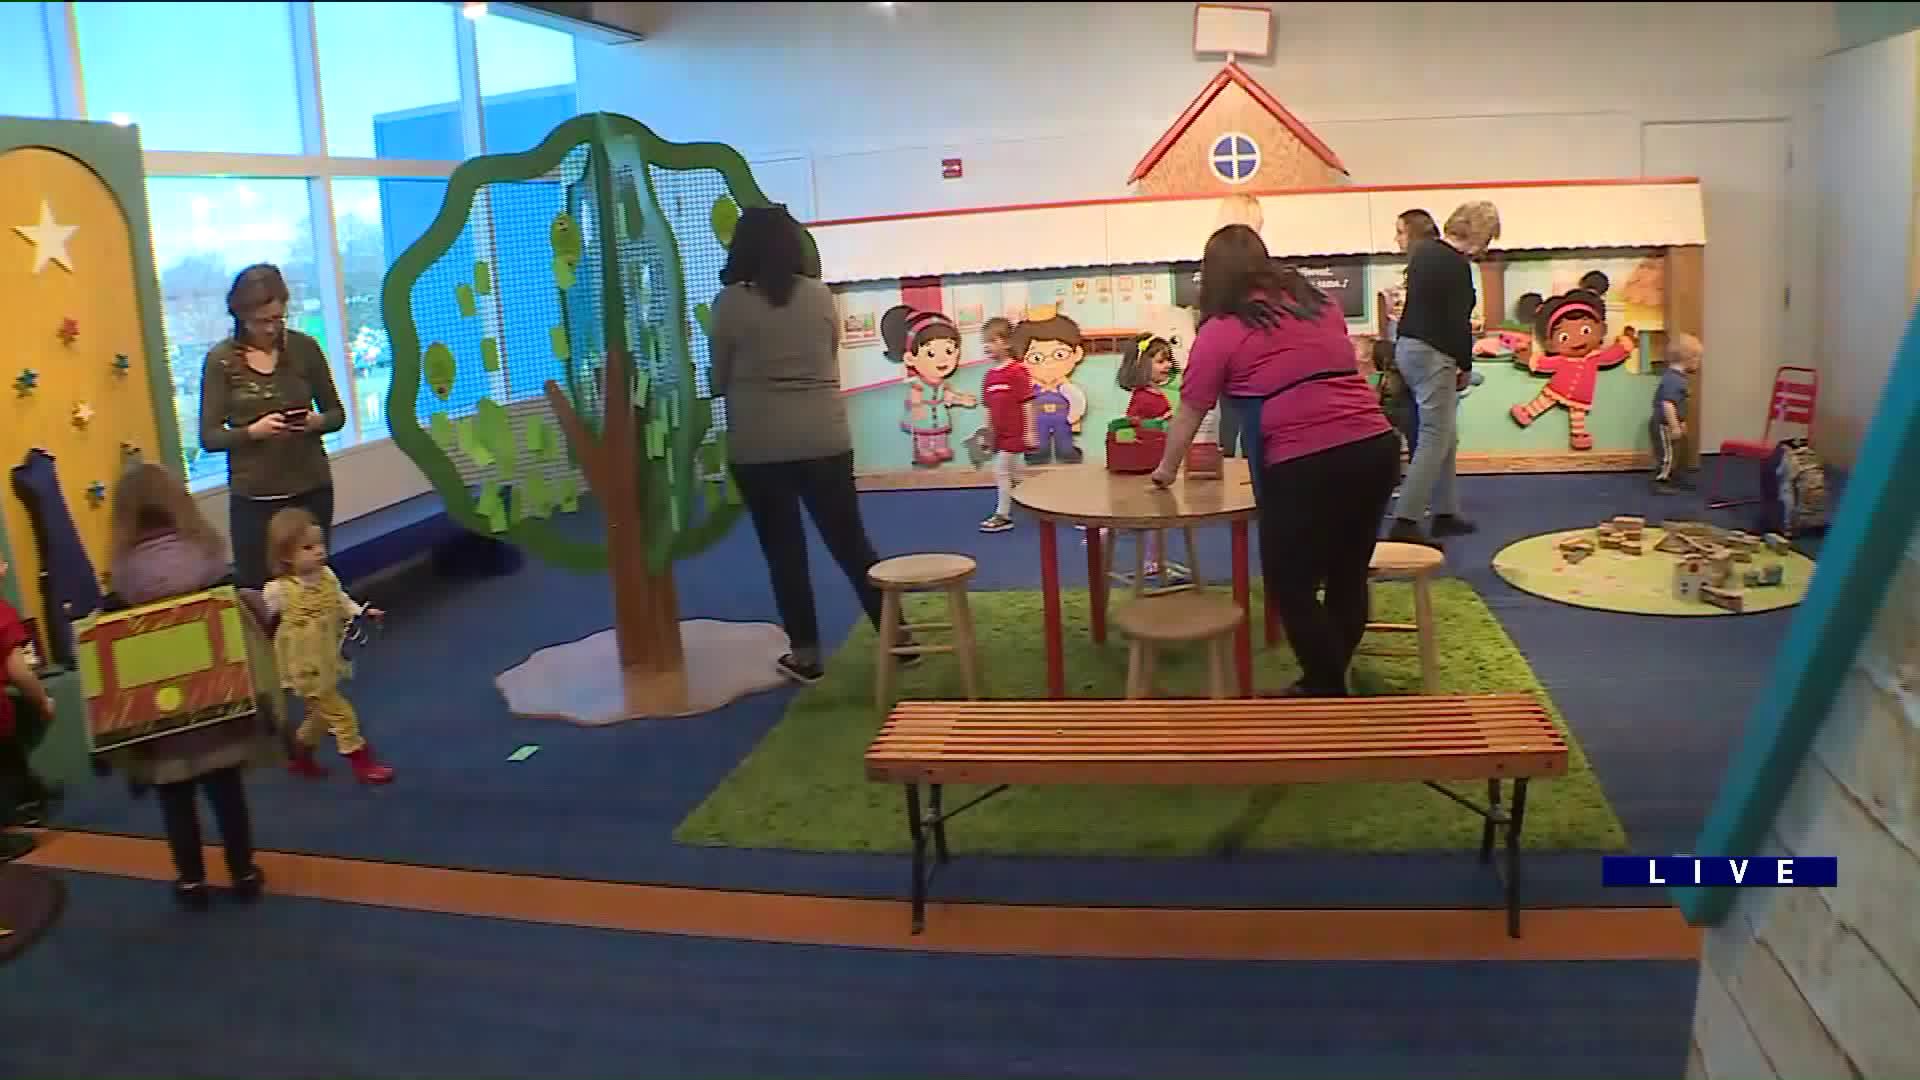 Around Town visits the ‘Daniel Tiger’s Neighborhood’ exhibit at the DuPage Children’s Museum